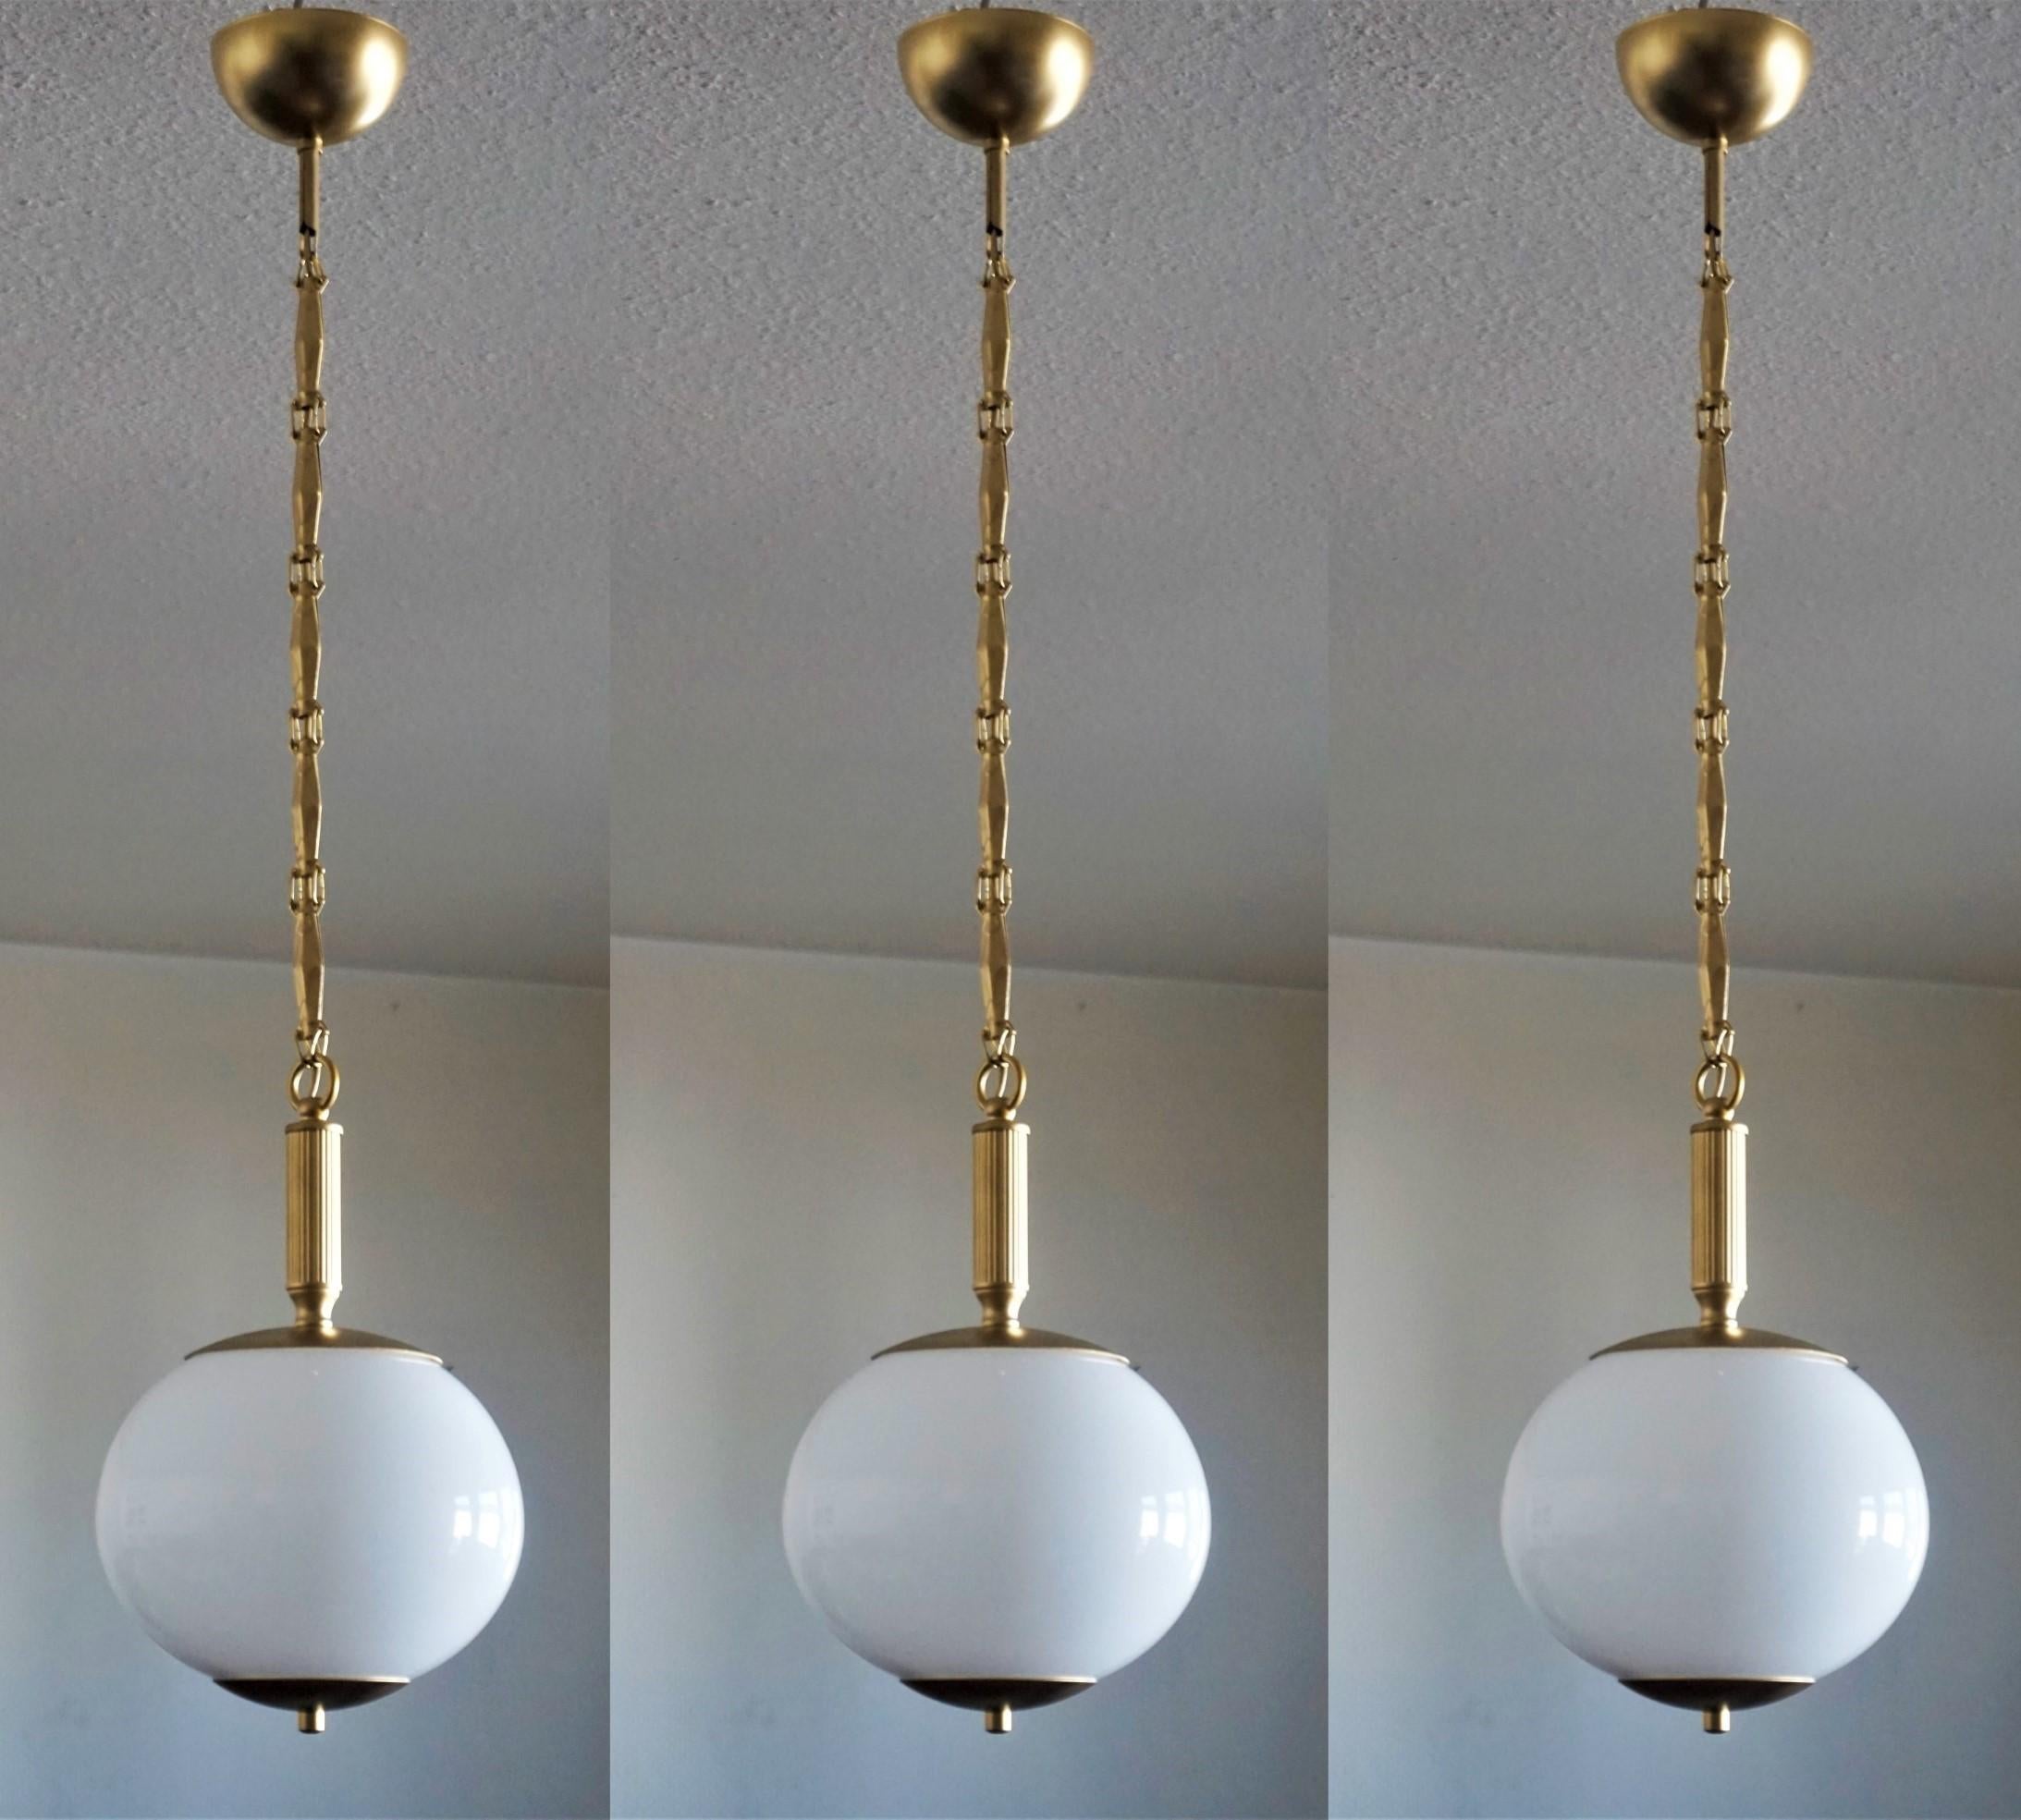 A set of three Italian hand blown opaline globe pendants, brass mounts, chain and canopy, 1950-1959.
With a single porcelain Edison E-27 light socket for large sized bulb (each pendant).
Measures: Height 41 in / 104 cm, adjustable by extending or